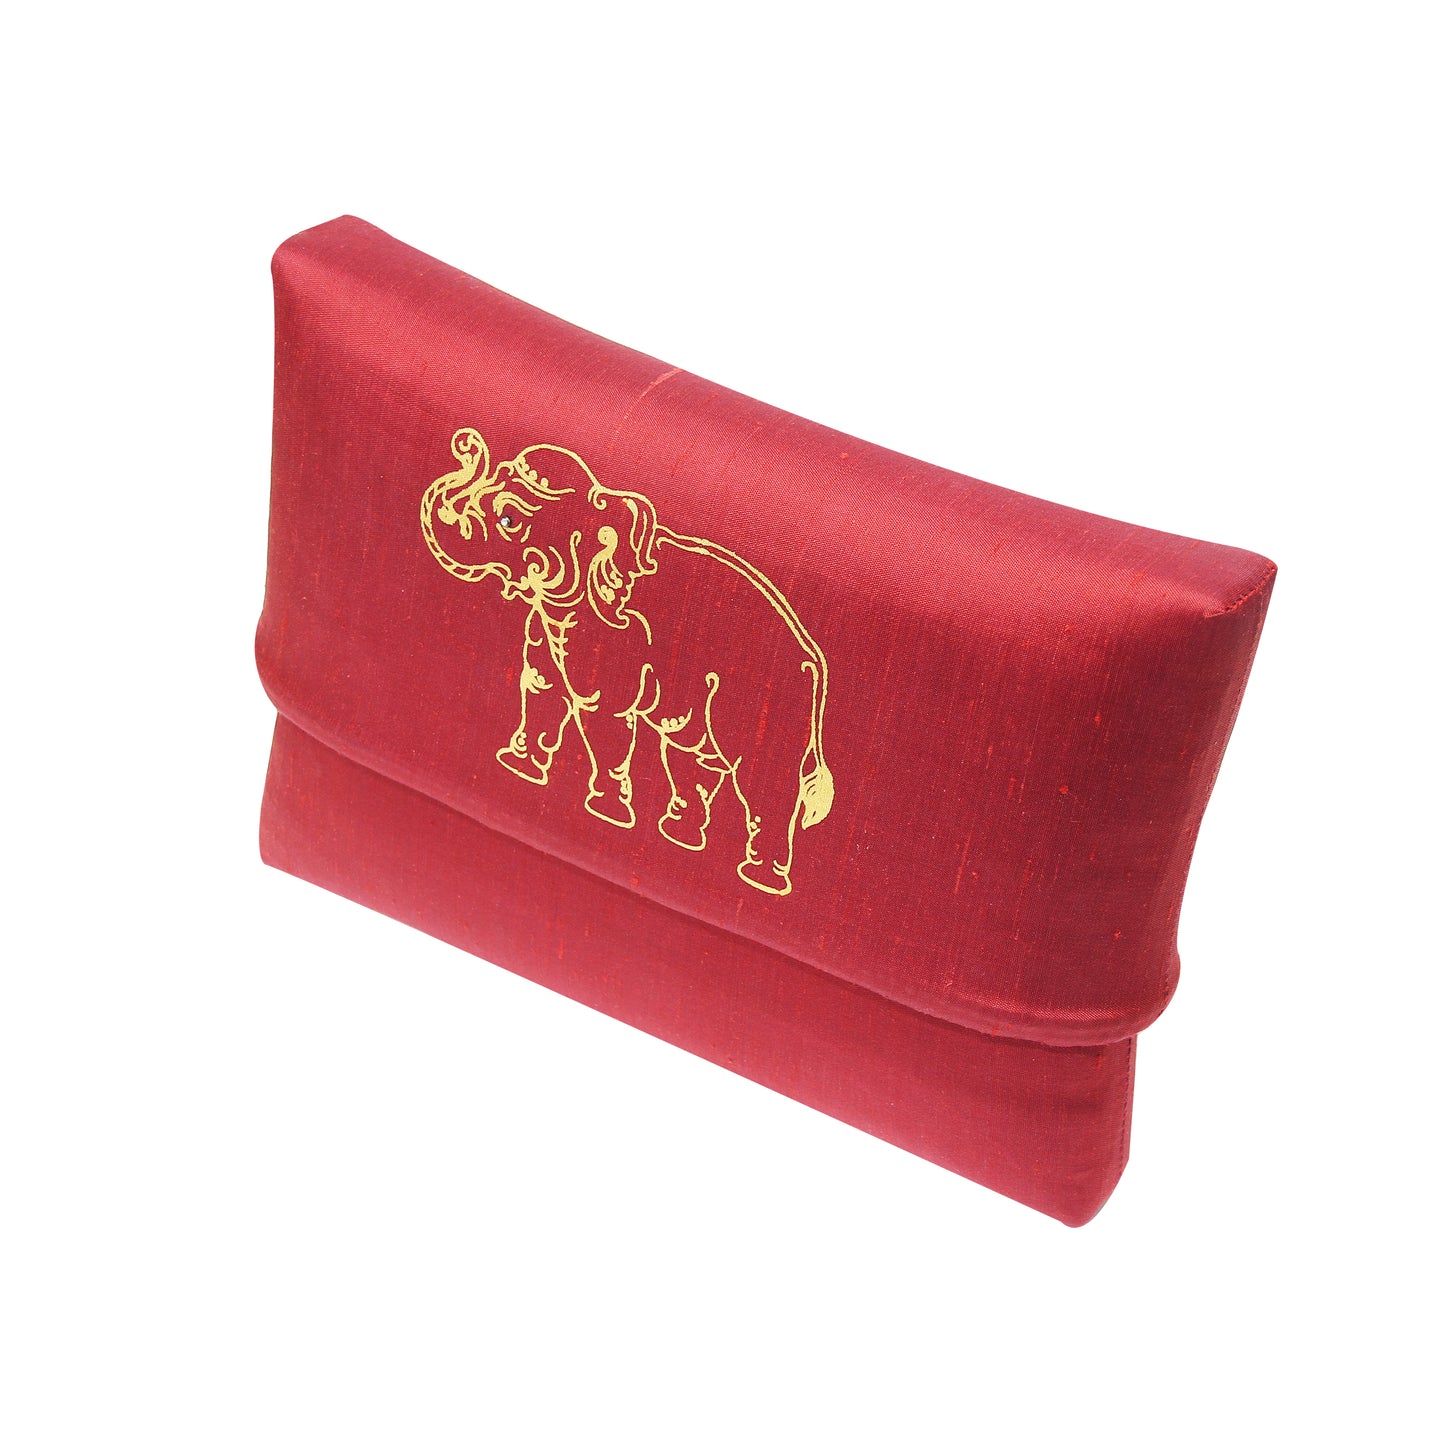 Red Rattan Handbag with Gold Painted Elephant